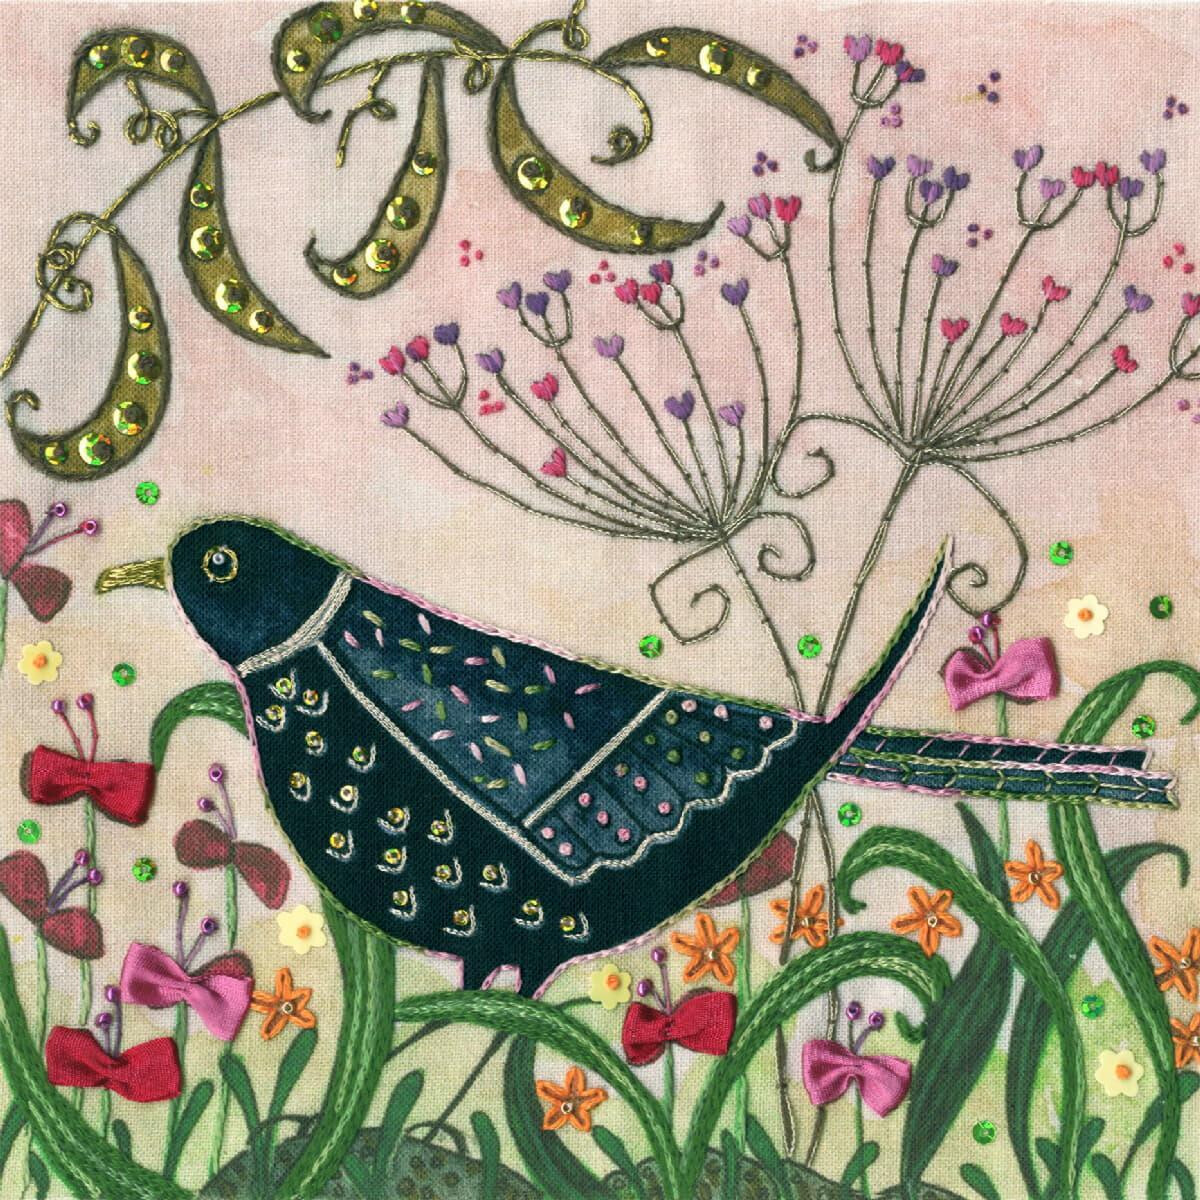 A whimsical embroidery pack illustration from Bothy...